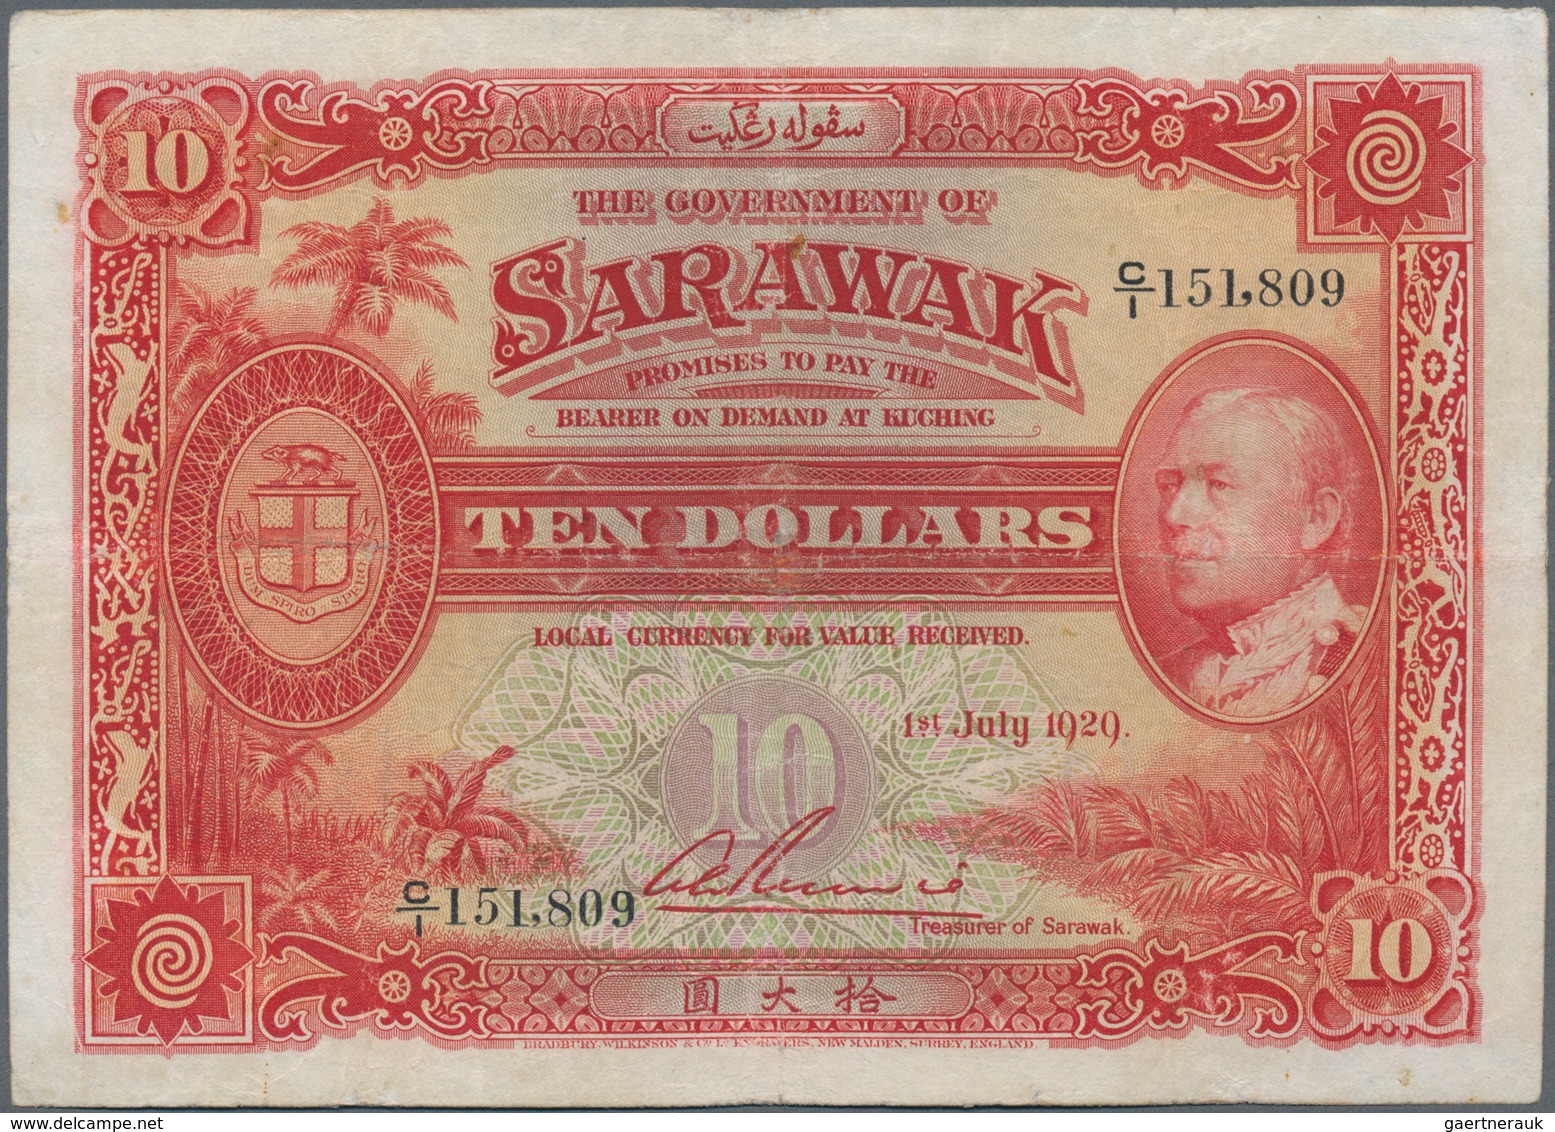 Sarawak: Government Of Sarawak 10 Dollars 1st July 1929, P.16, Still Great Condition With Strong Pap - Maleisië